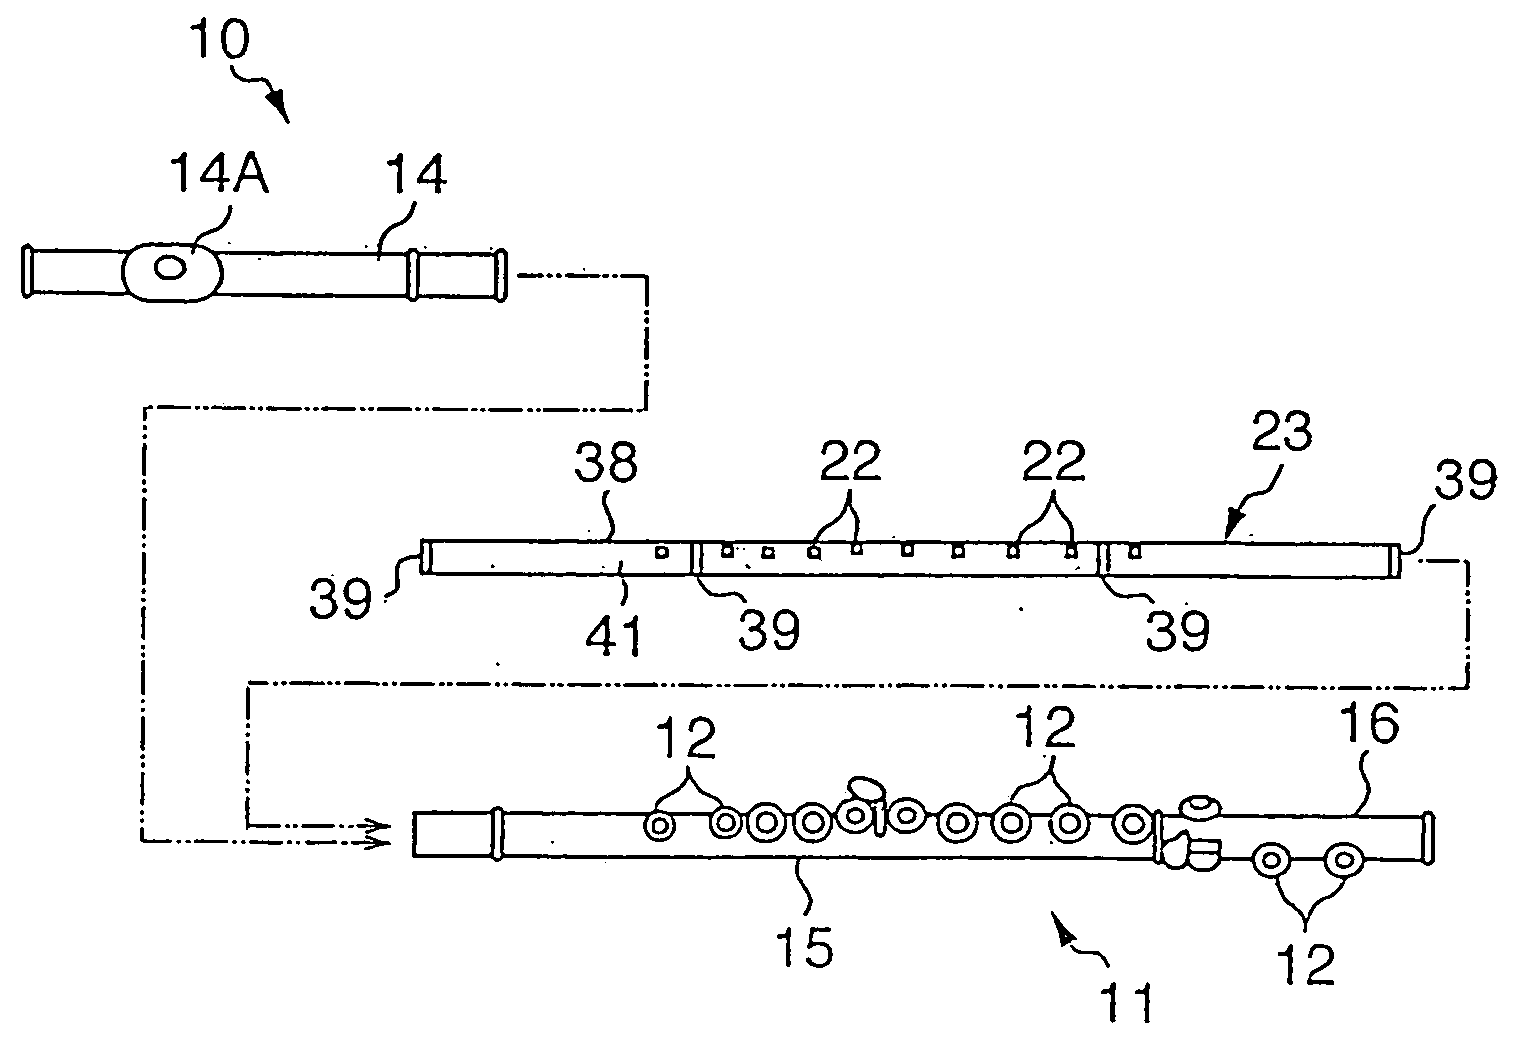 Key detection structure for wind instrument